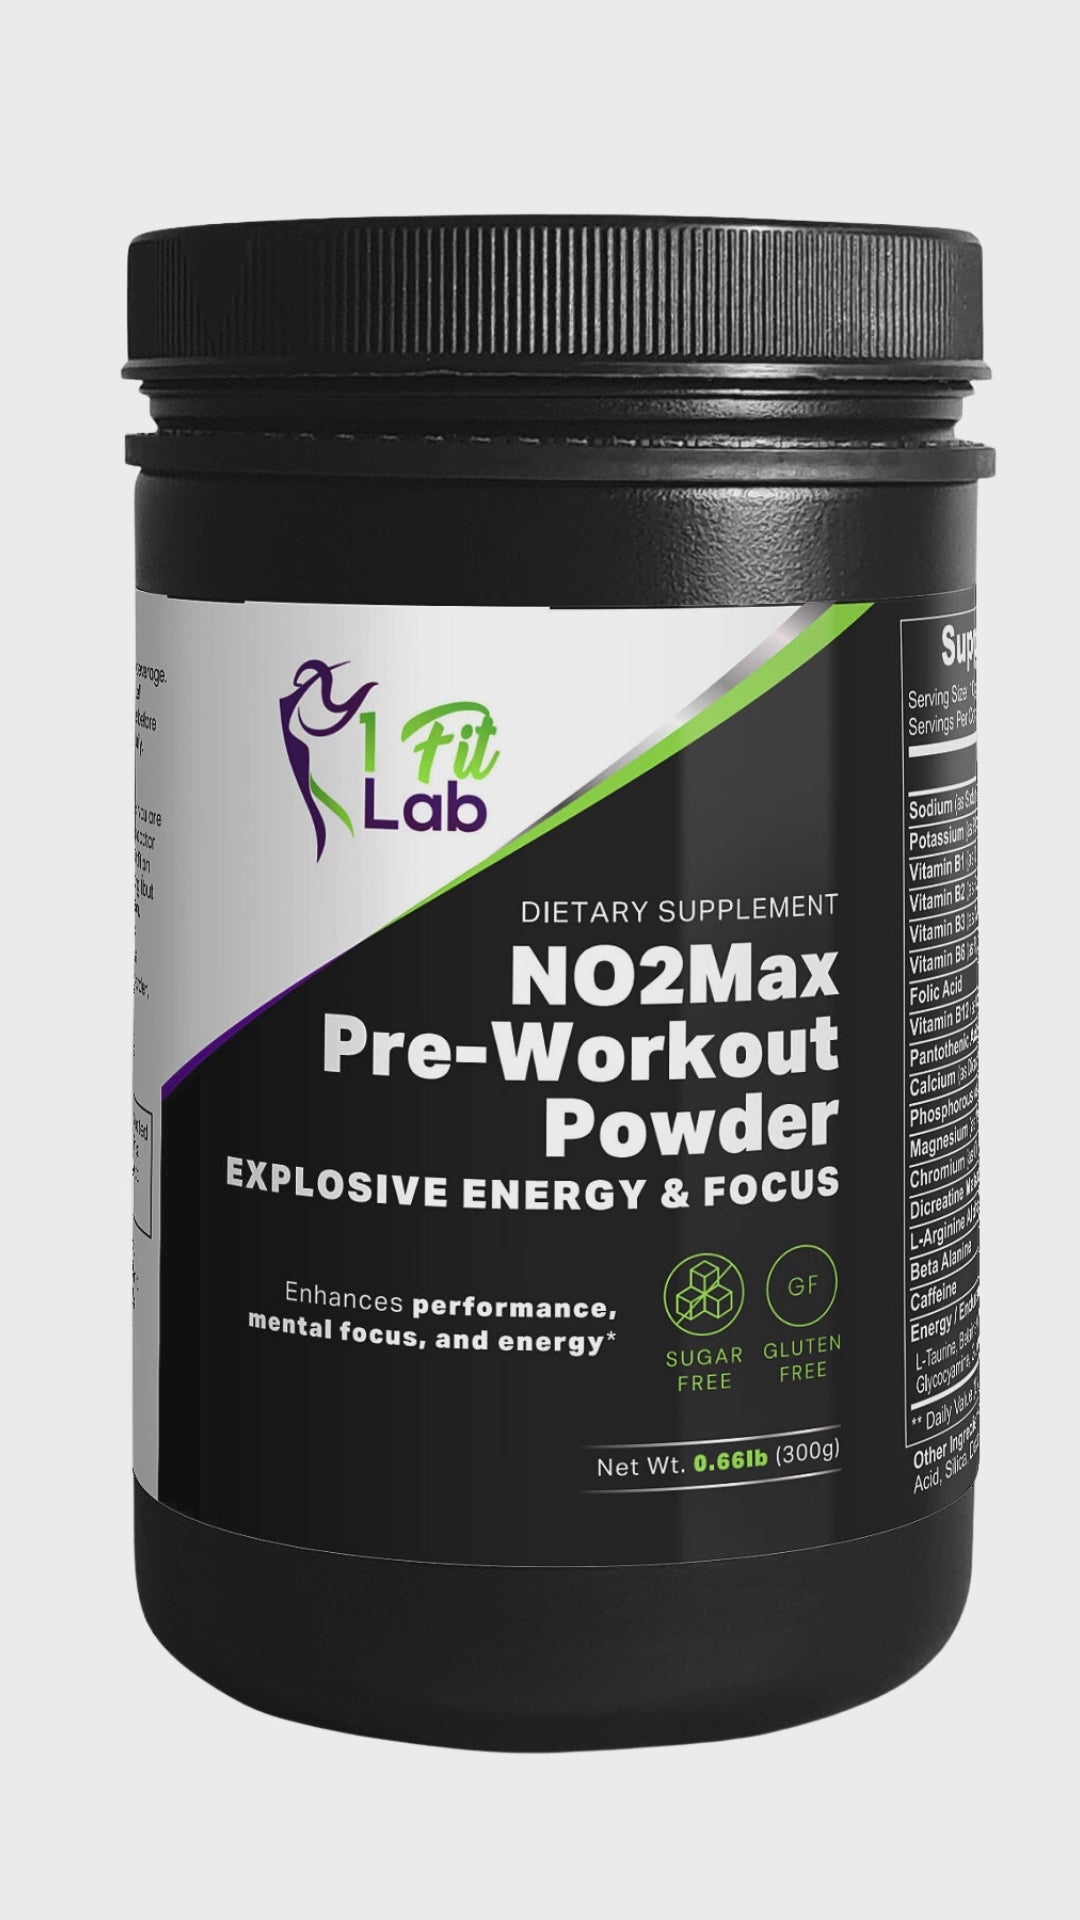 video highlighting the benefits of n02max premium pre workout powder